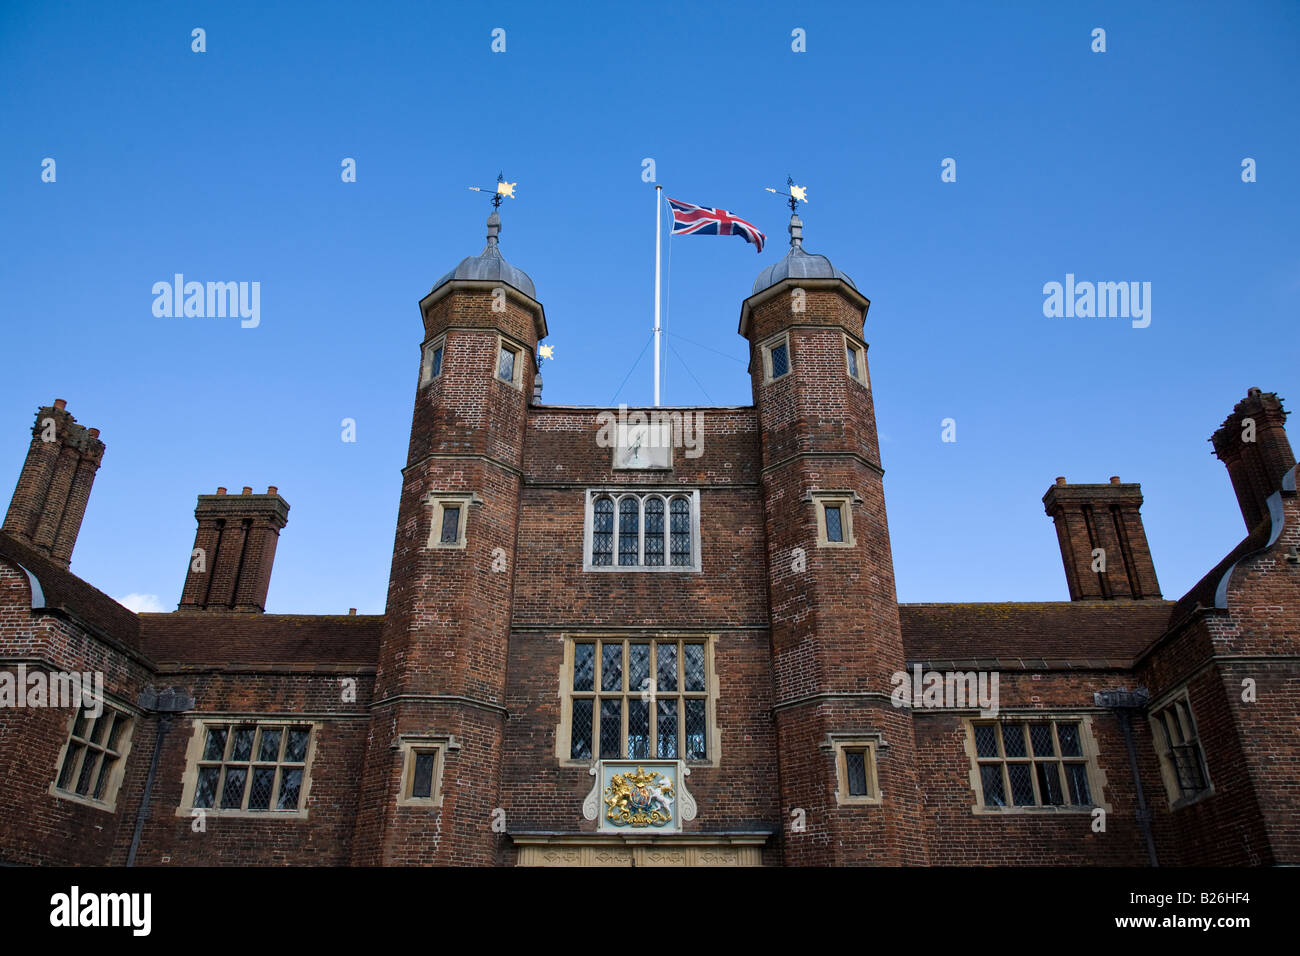 The front entrance of the Hospital of the Blessed Trinity or Abbot's Hospital, Guildford, Surrey, England. Stock Photo